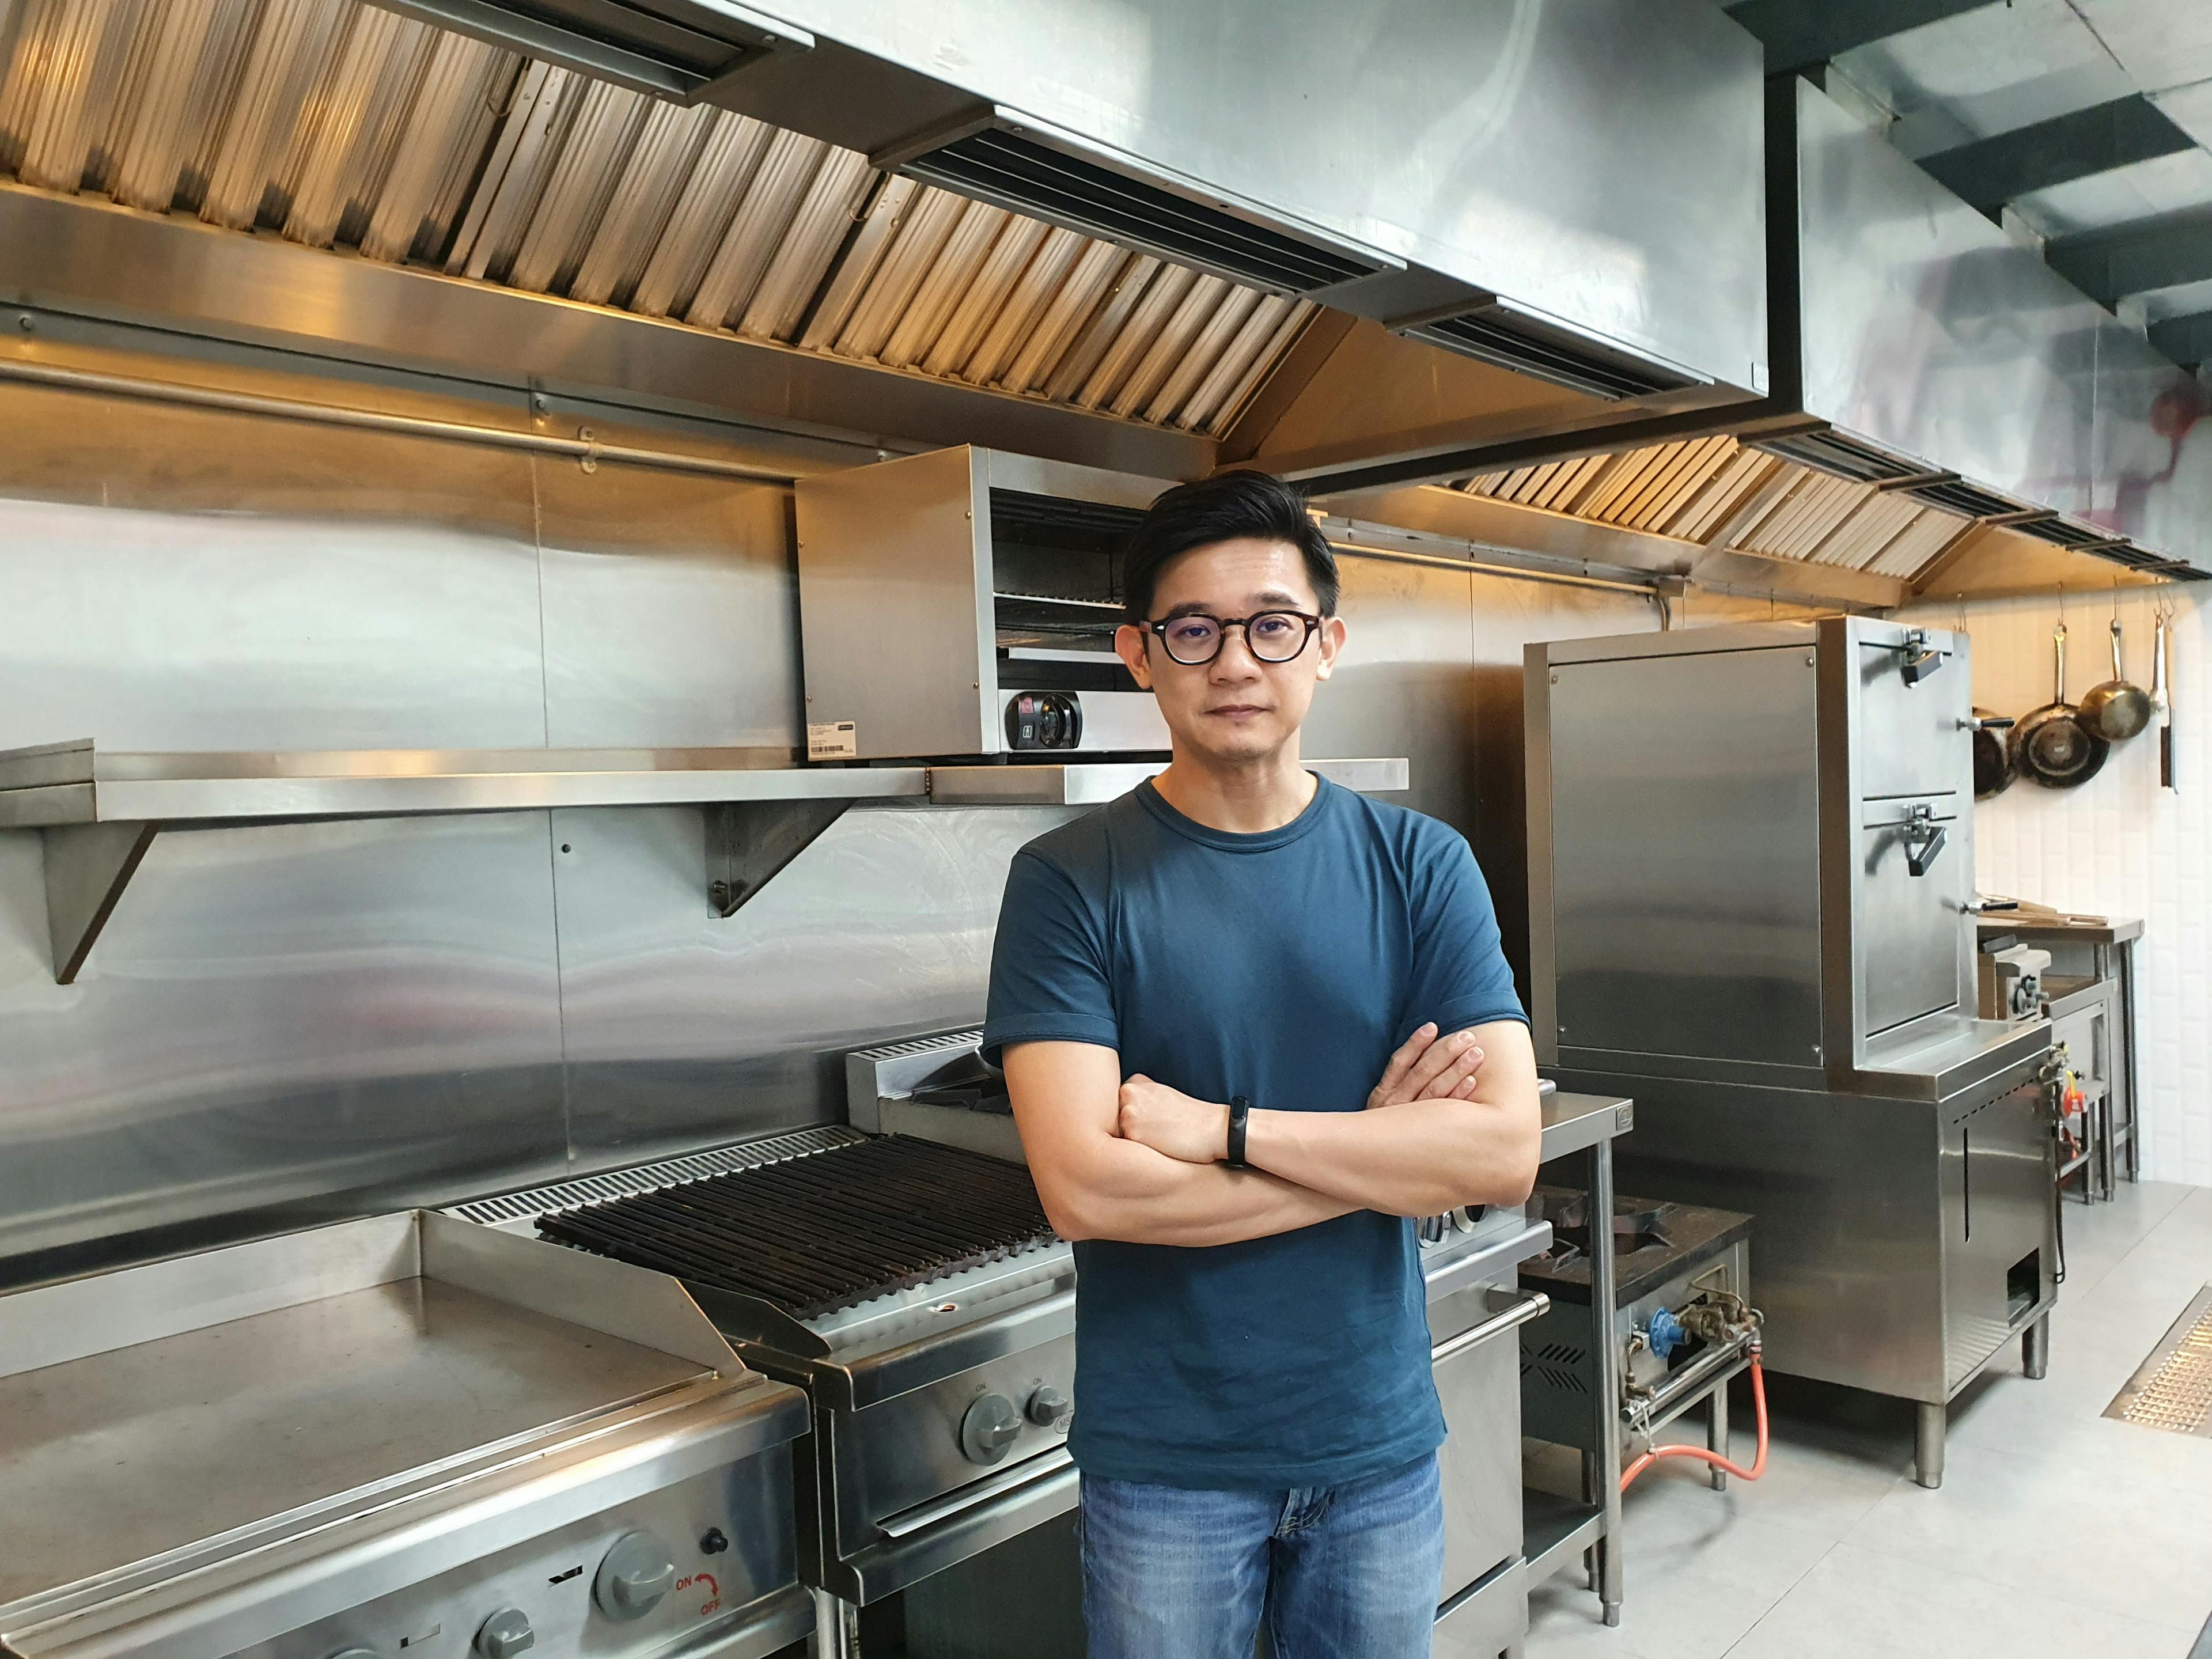 The founder of Diet Your Way in the kitchen